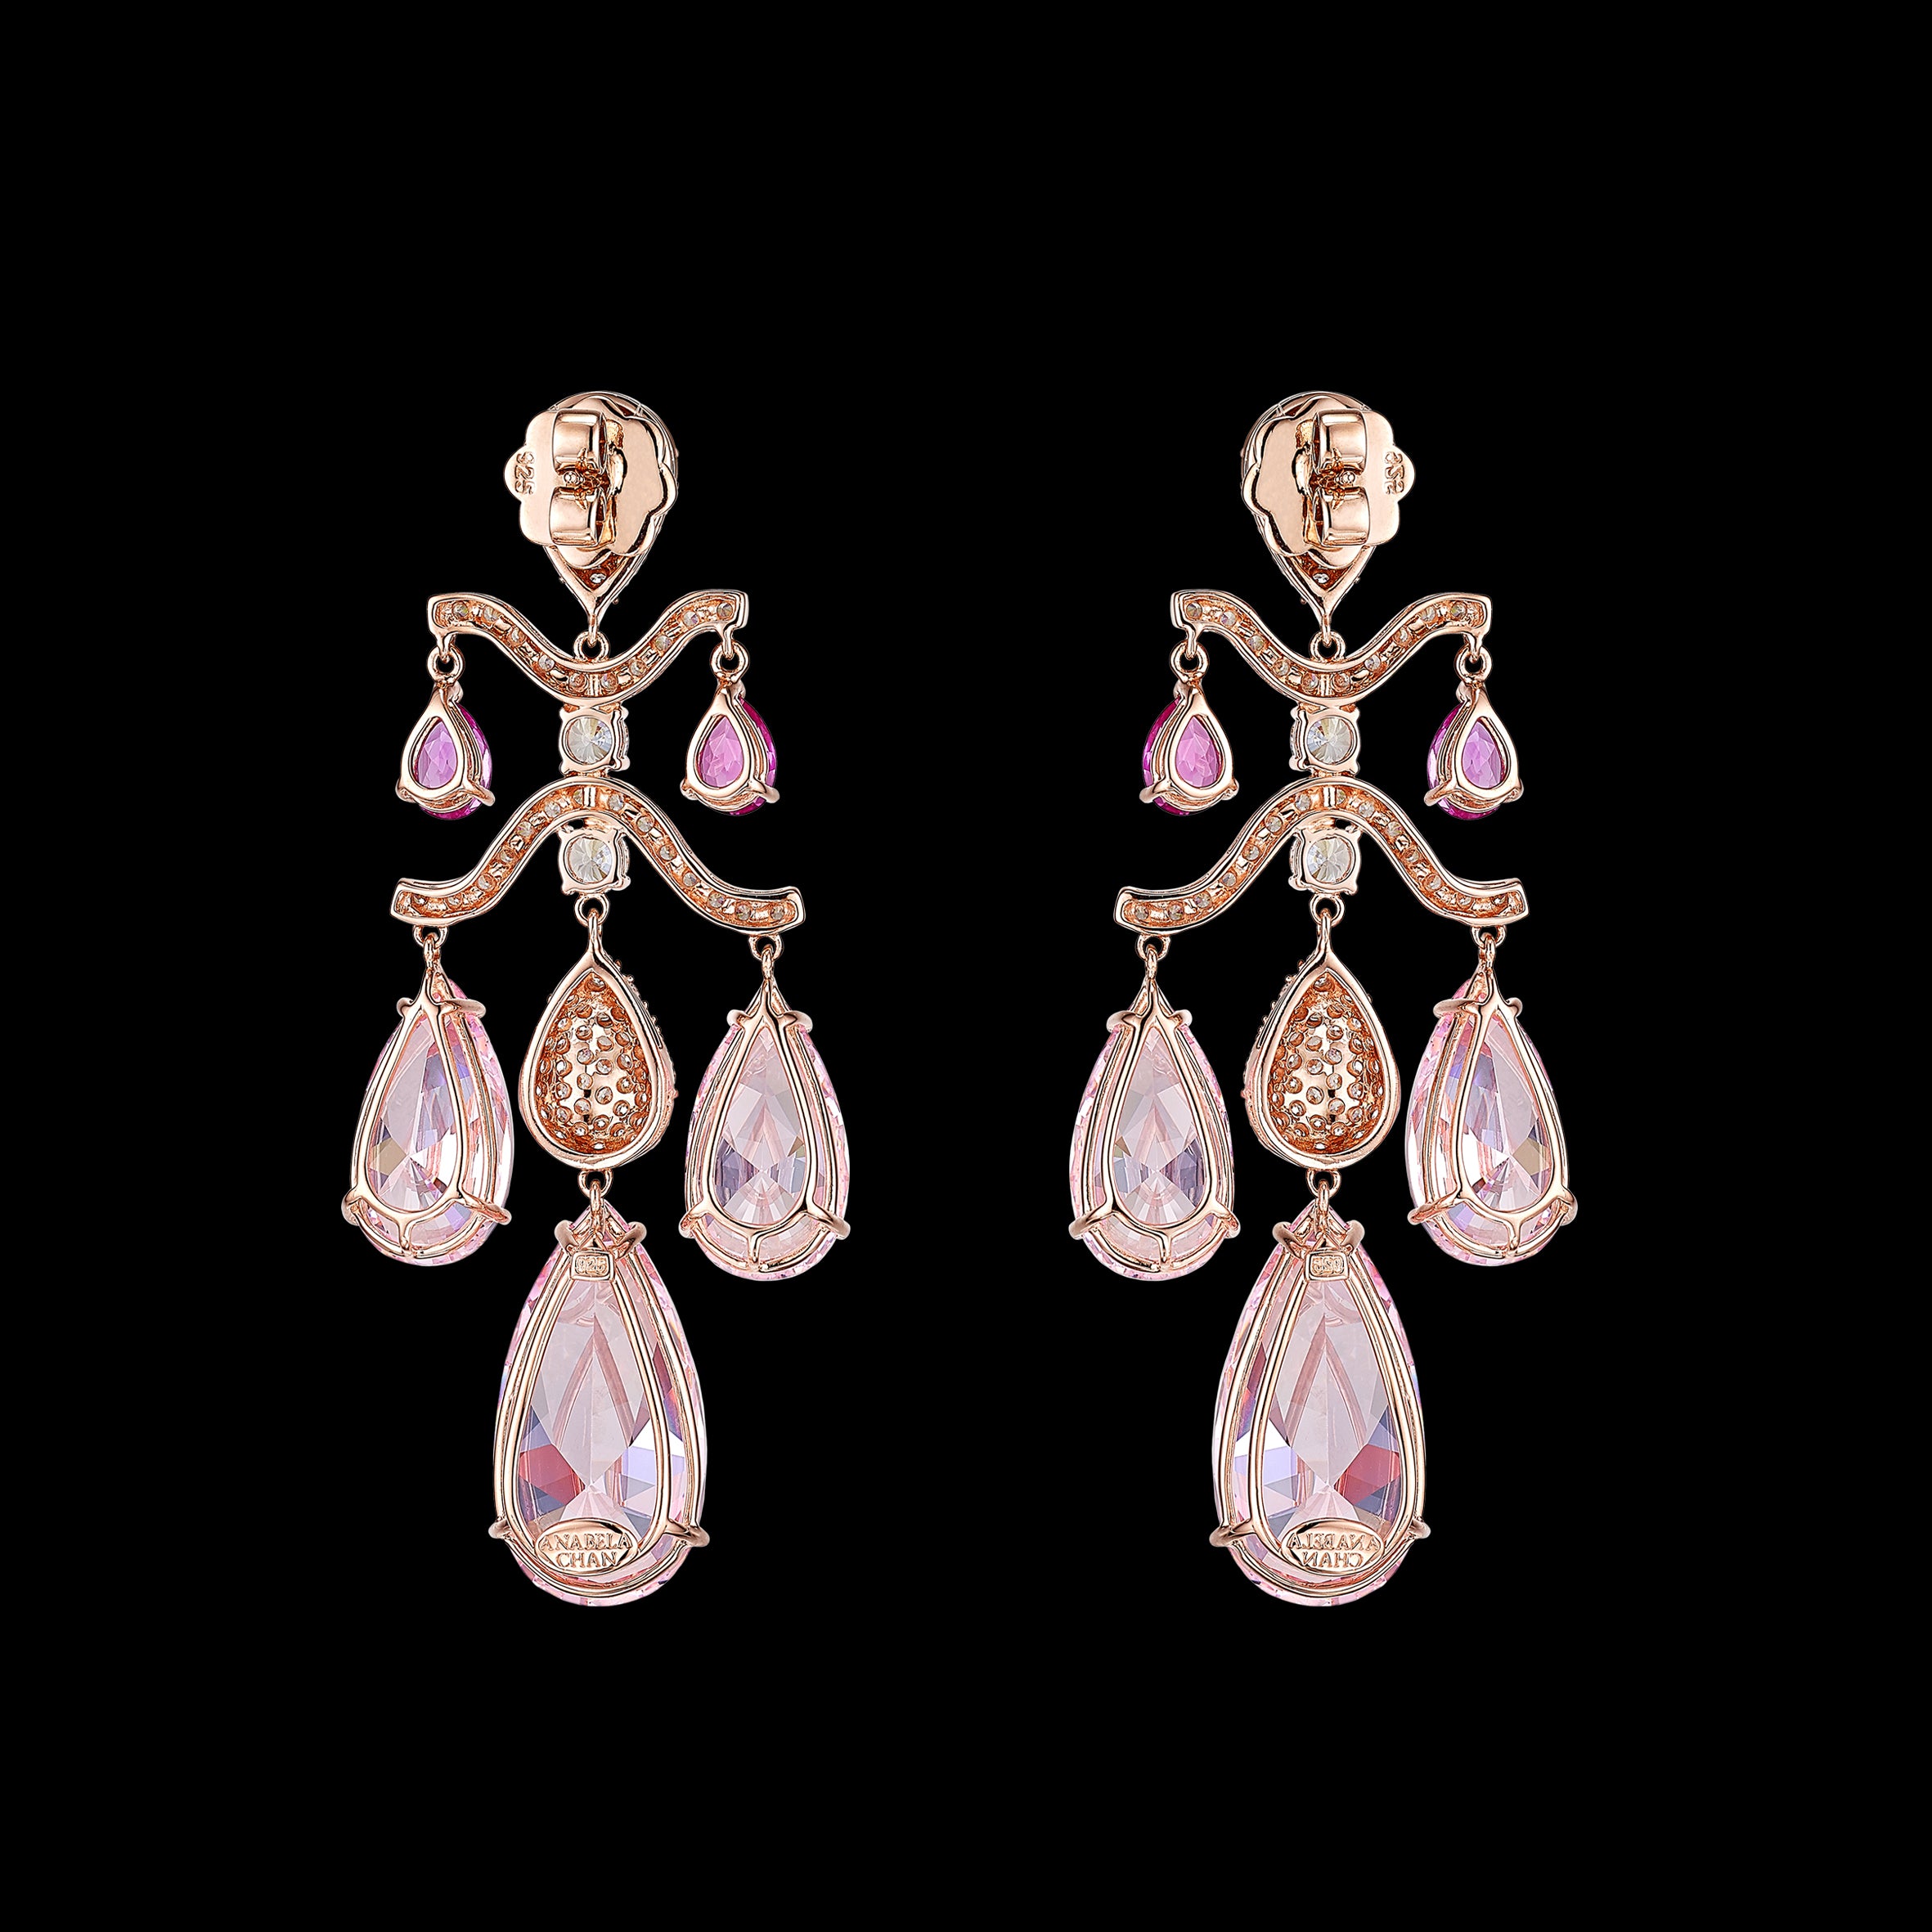 Pink Sapphire Chandelier Earrings, Earring, Anabela Chan Joaillerie - Fine jewelry with laboratory grown and created gemstones hand-crafted in the United Kingdom. Anabela Chan Joaillerie is the first fine jewellery brand in the world to champion laboratory-grown and created gemstones with high jewellery design, artisanal craftsmanship and a focus on ethical and sustainable innovations.